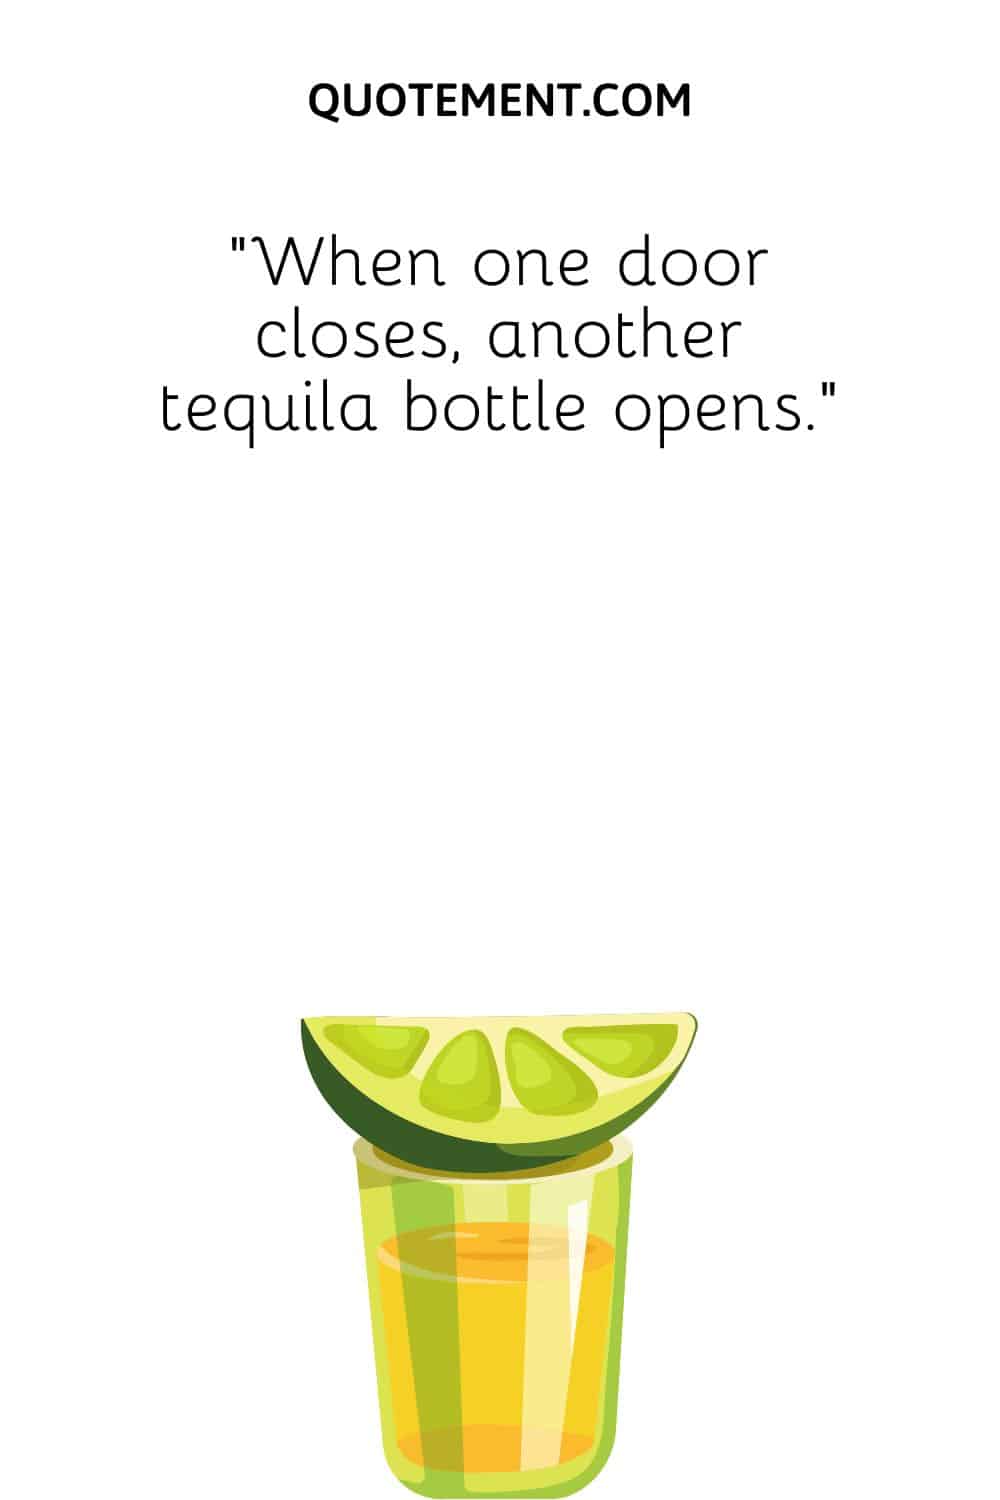 When one door closes, another tequila bottle opens